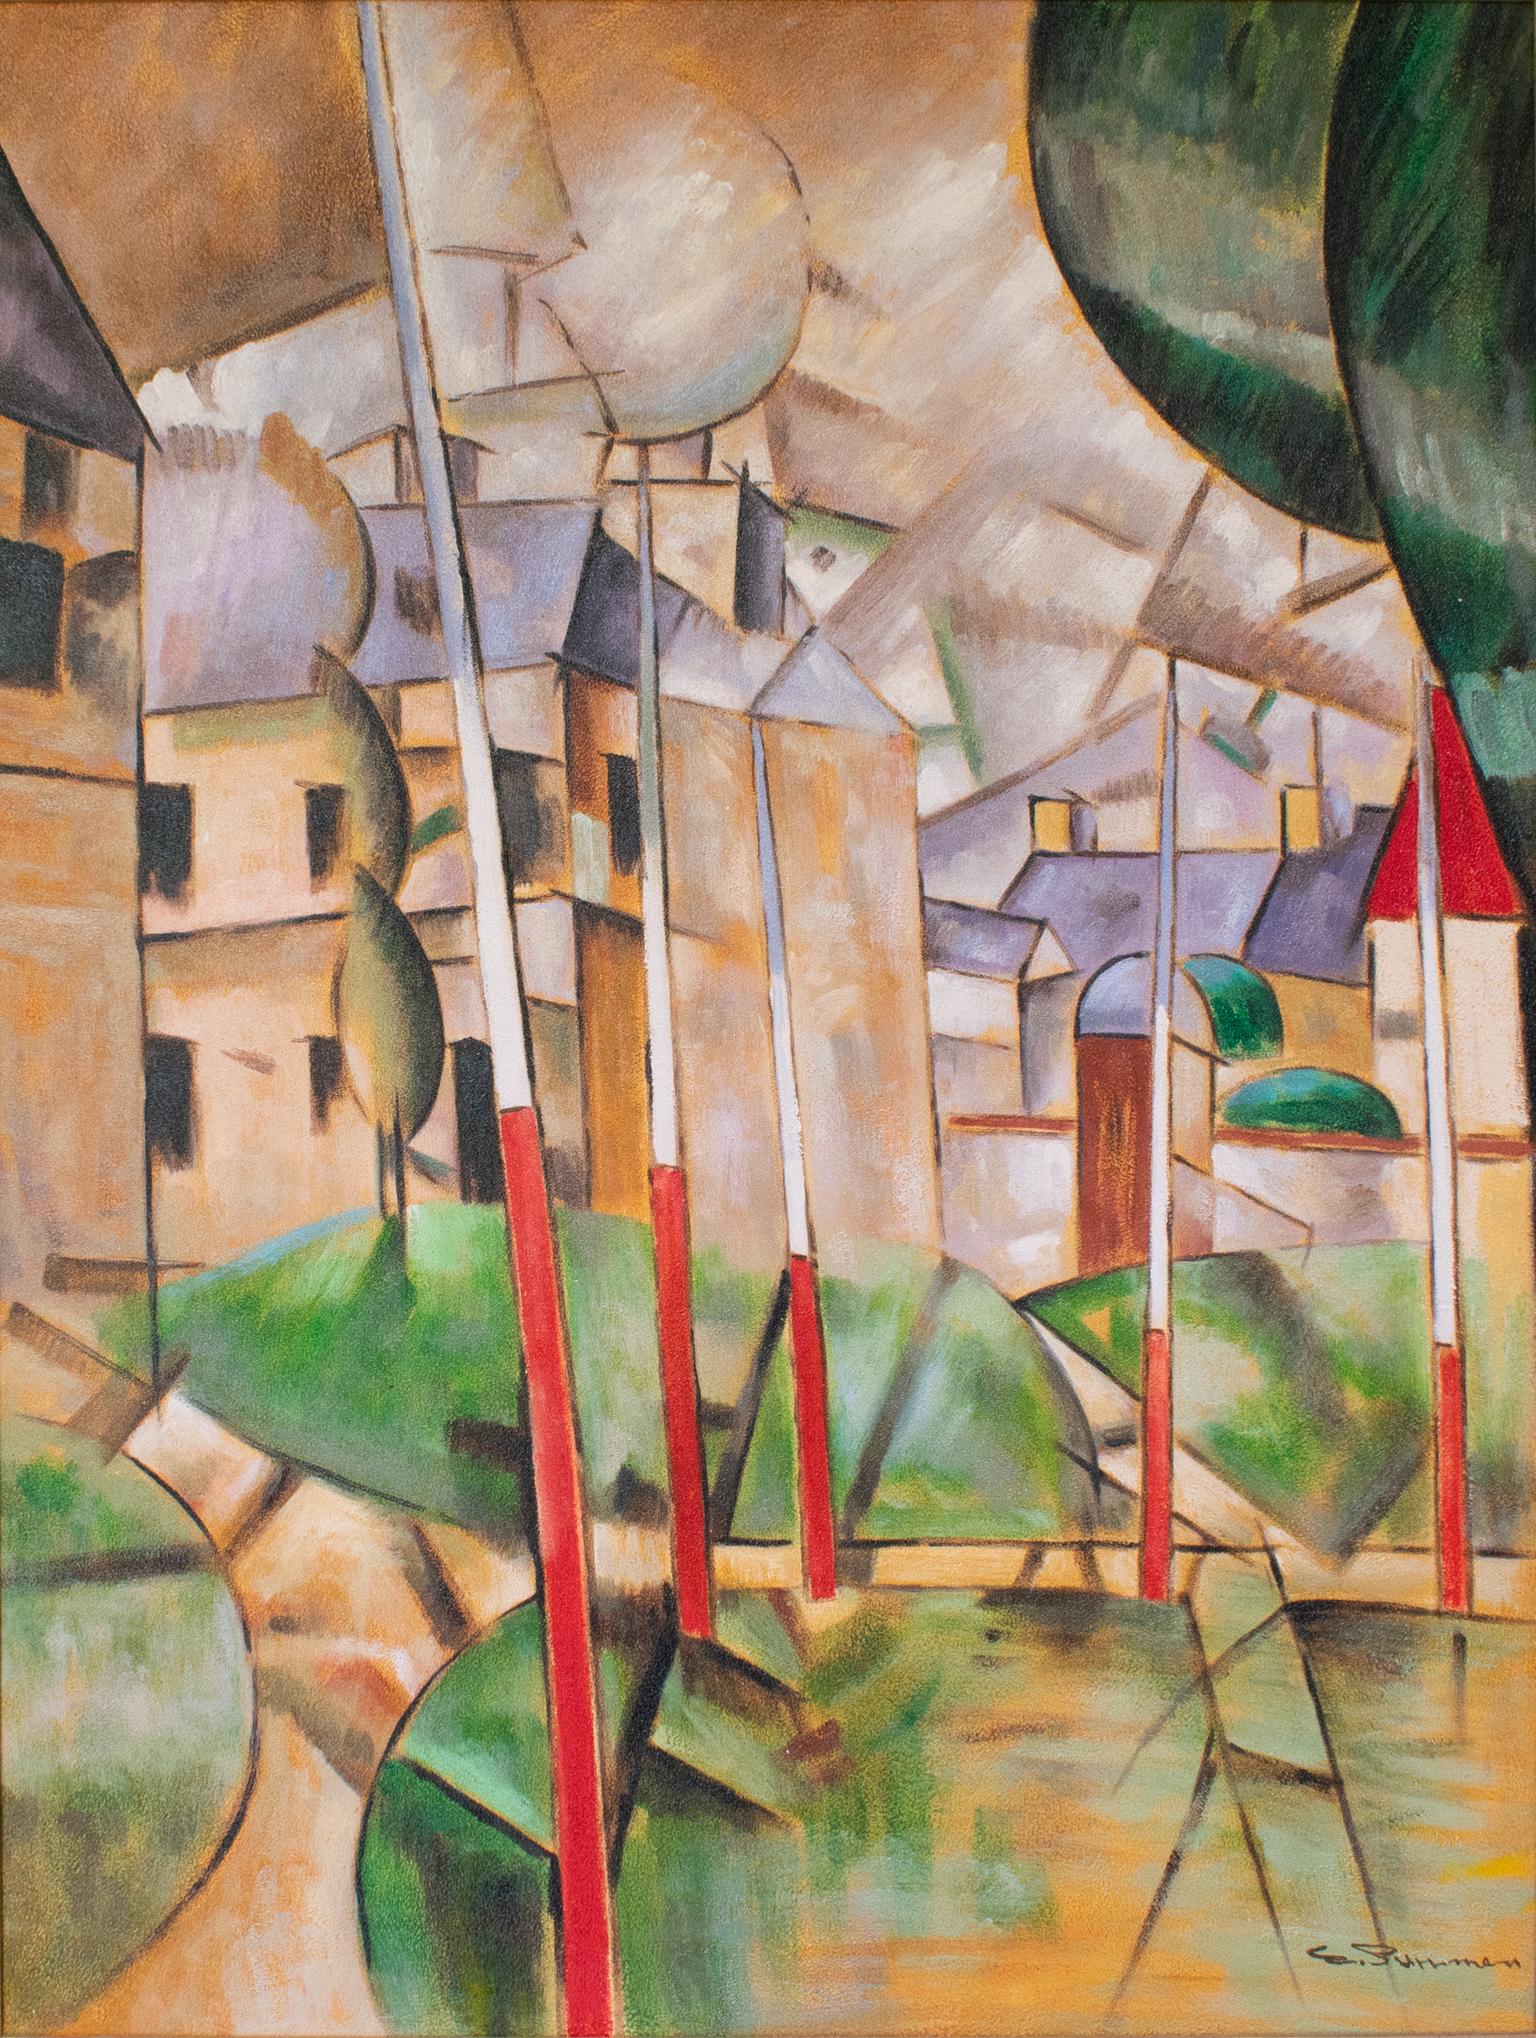 Abstract Cityscape Cubist Oil on Canvas Painting by E. Pullman For Sale 1